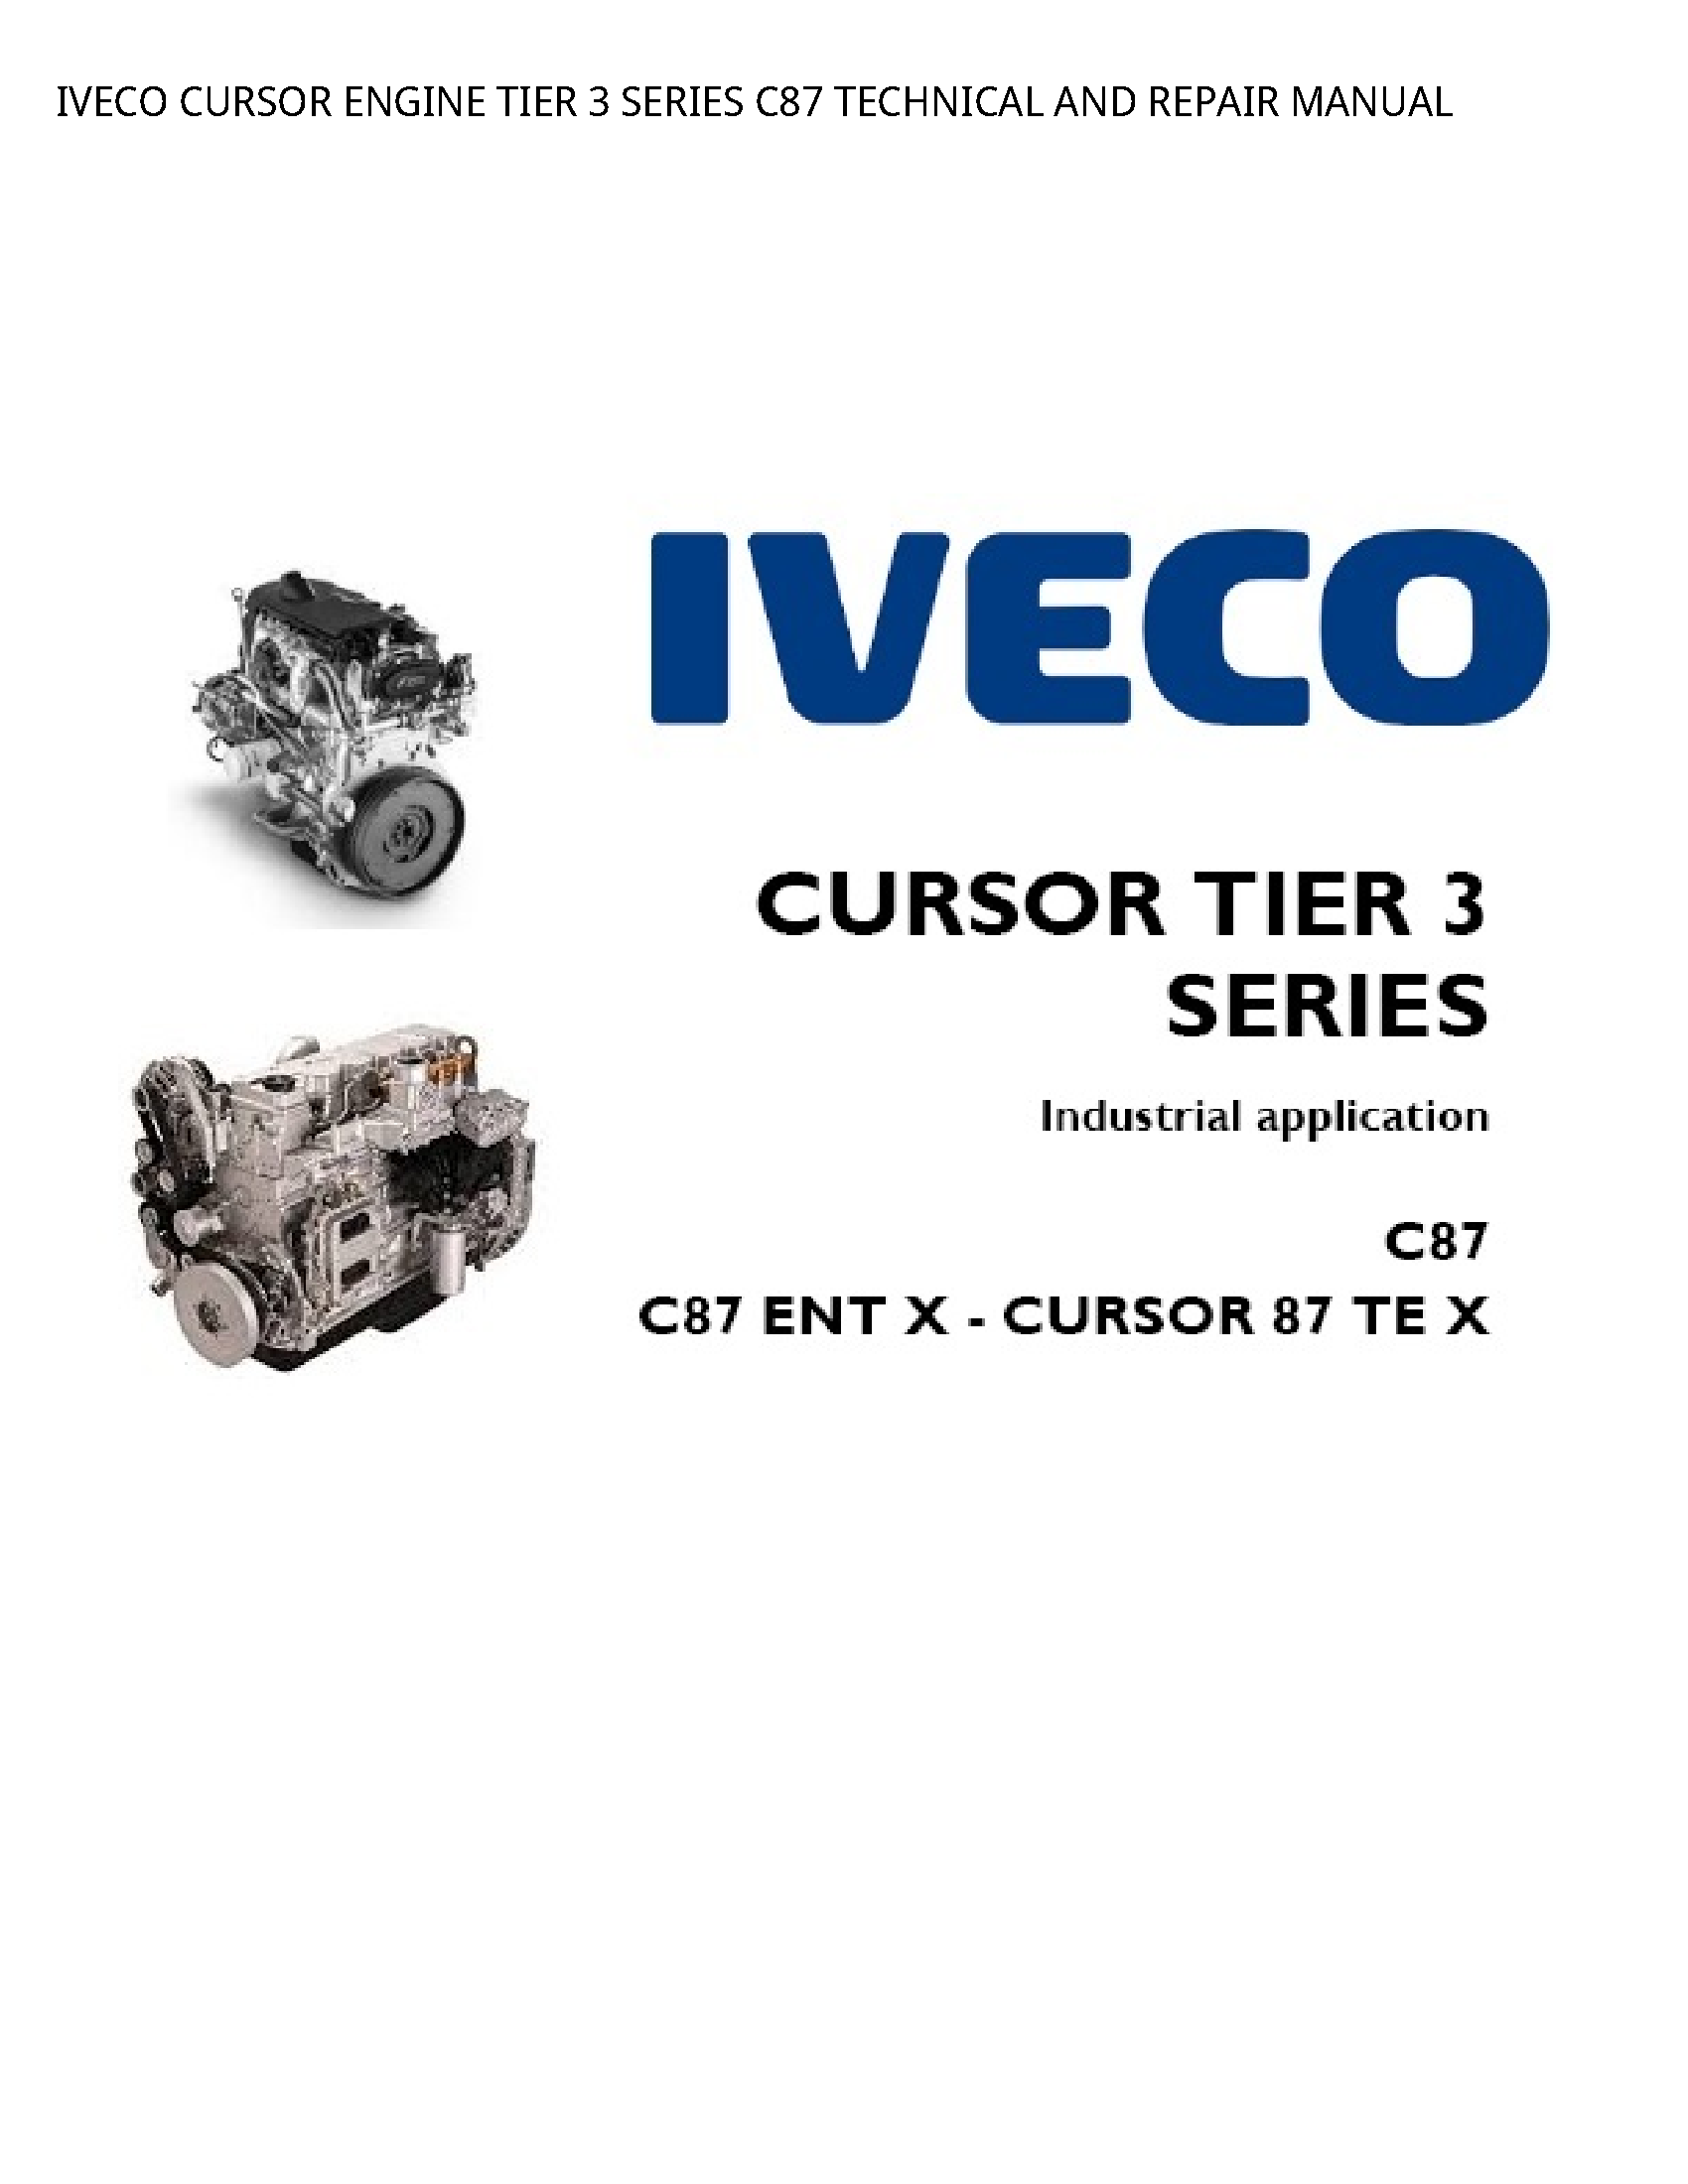 Iveco 3 CURSOR ENGINE TIER SERIES TECHNICAL AND REPAIR manual